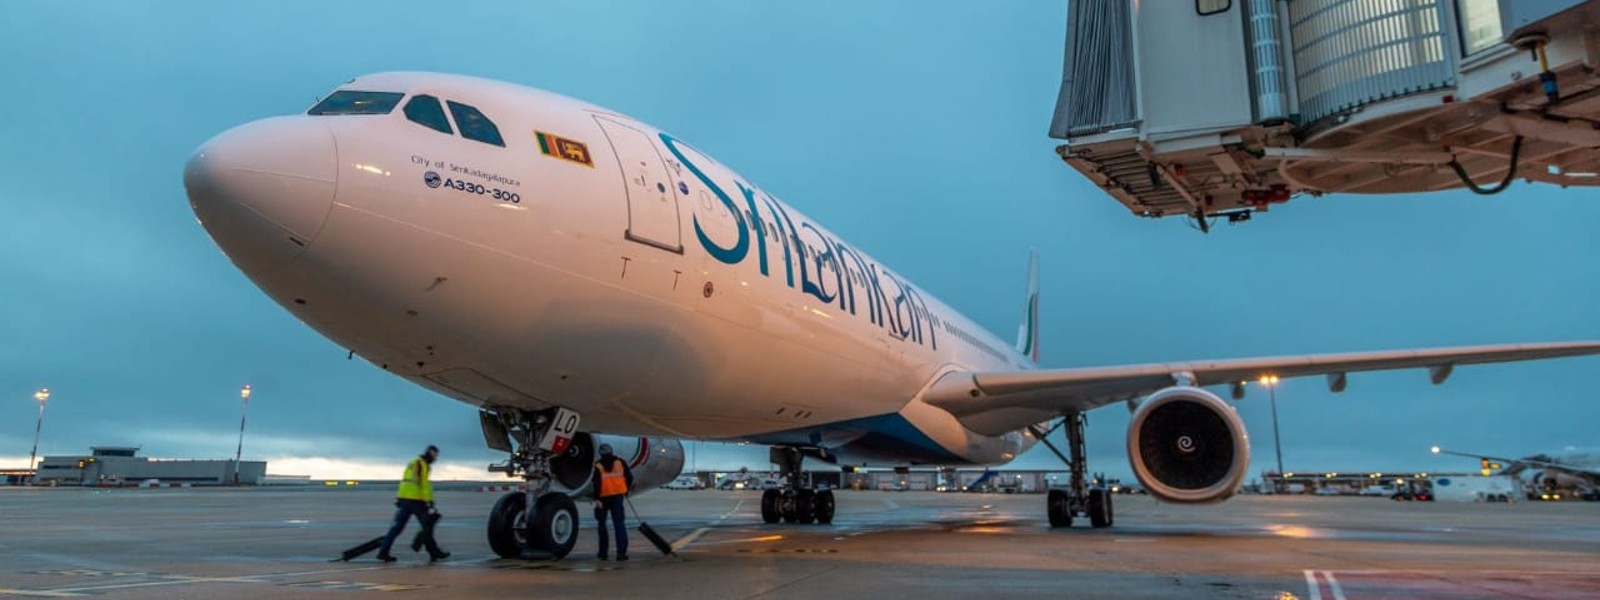 Flight Attendants’ Union requests SriLankan Airlines to provide cabin crew meal